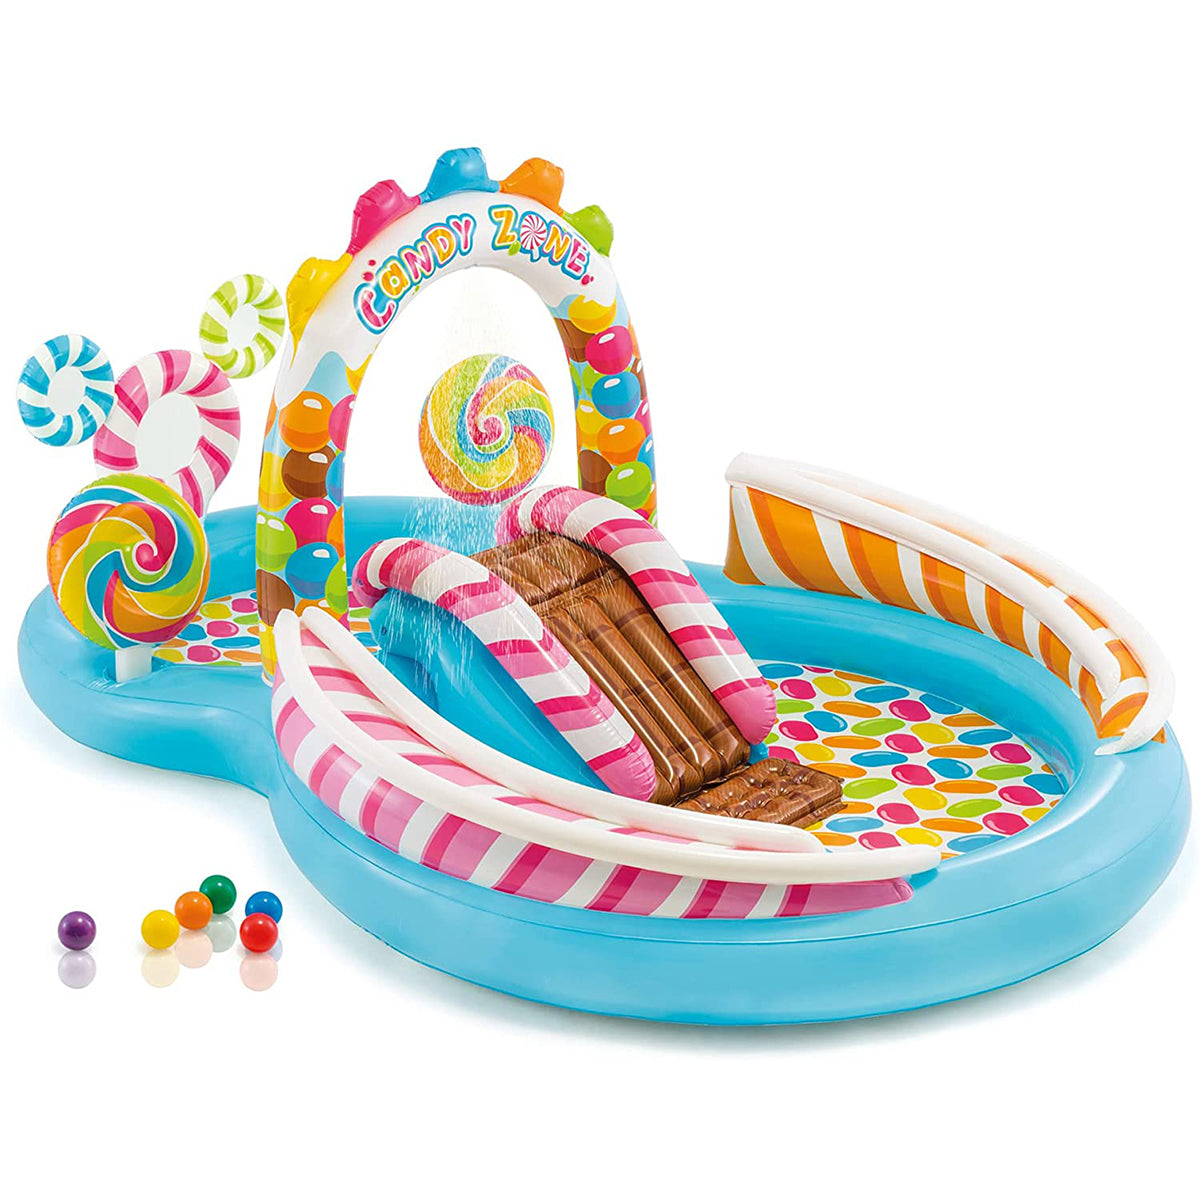 Candy Zone Kids Pool